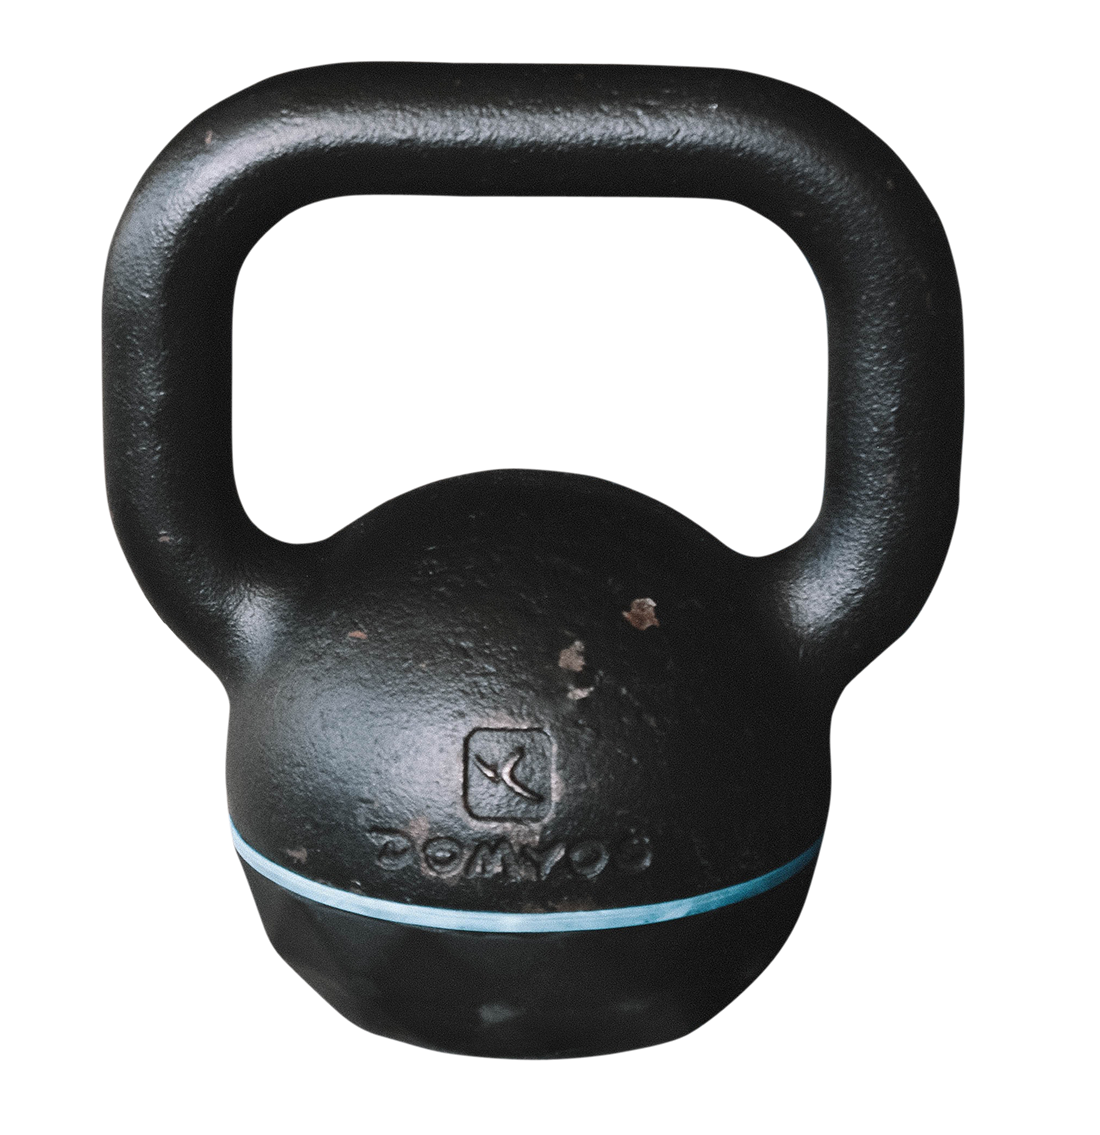 kettlebell png, kettlebell PNG image, transparent kettlebell png image, kettlebell png full hd images download